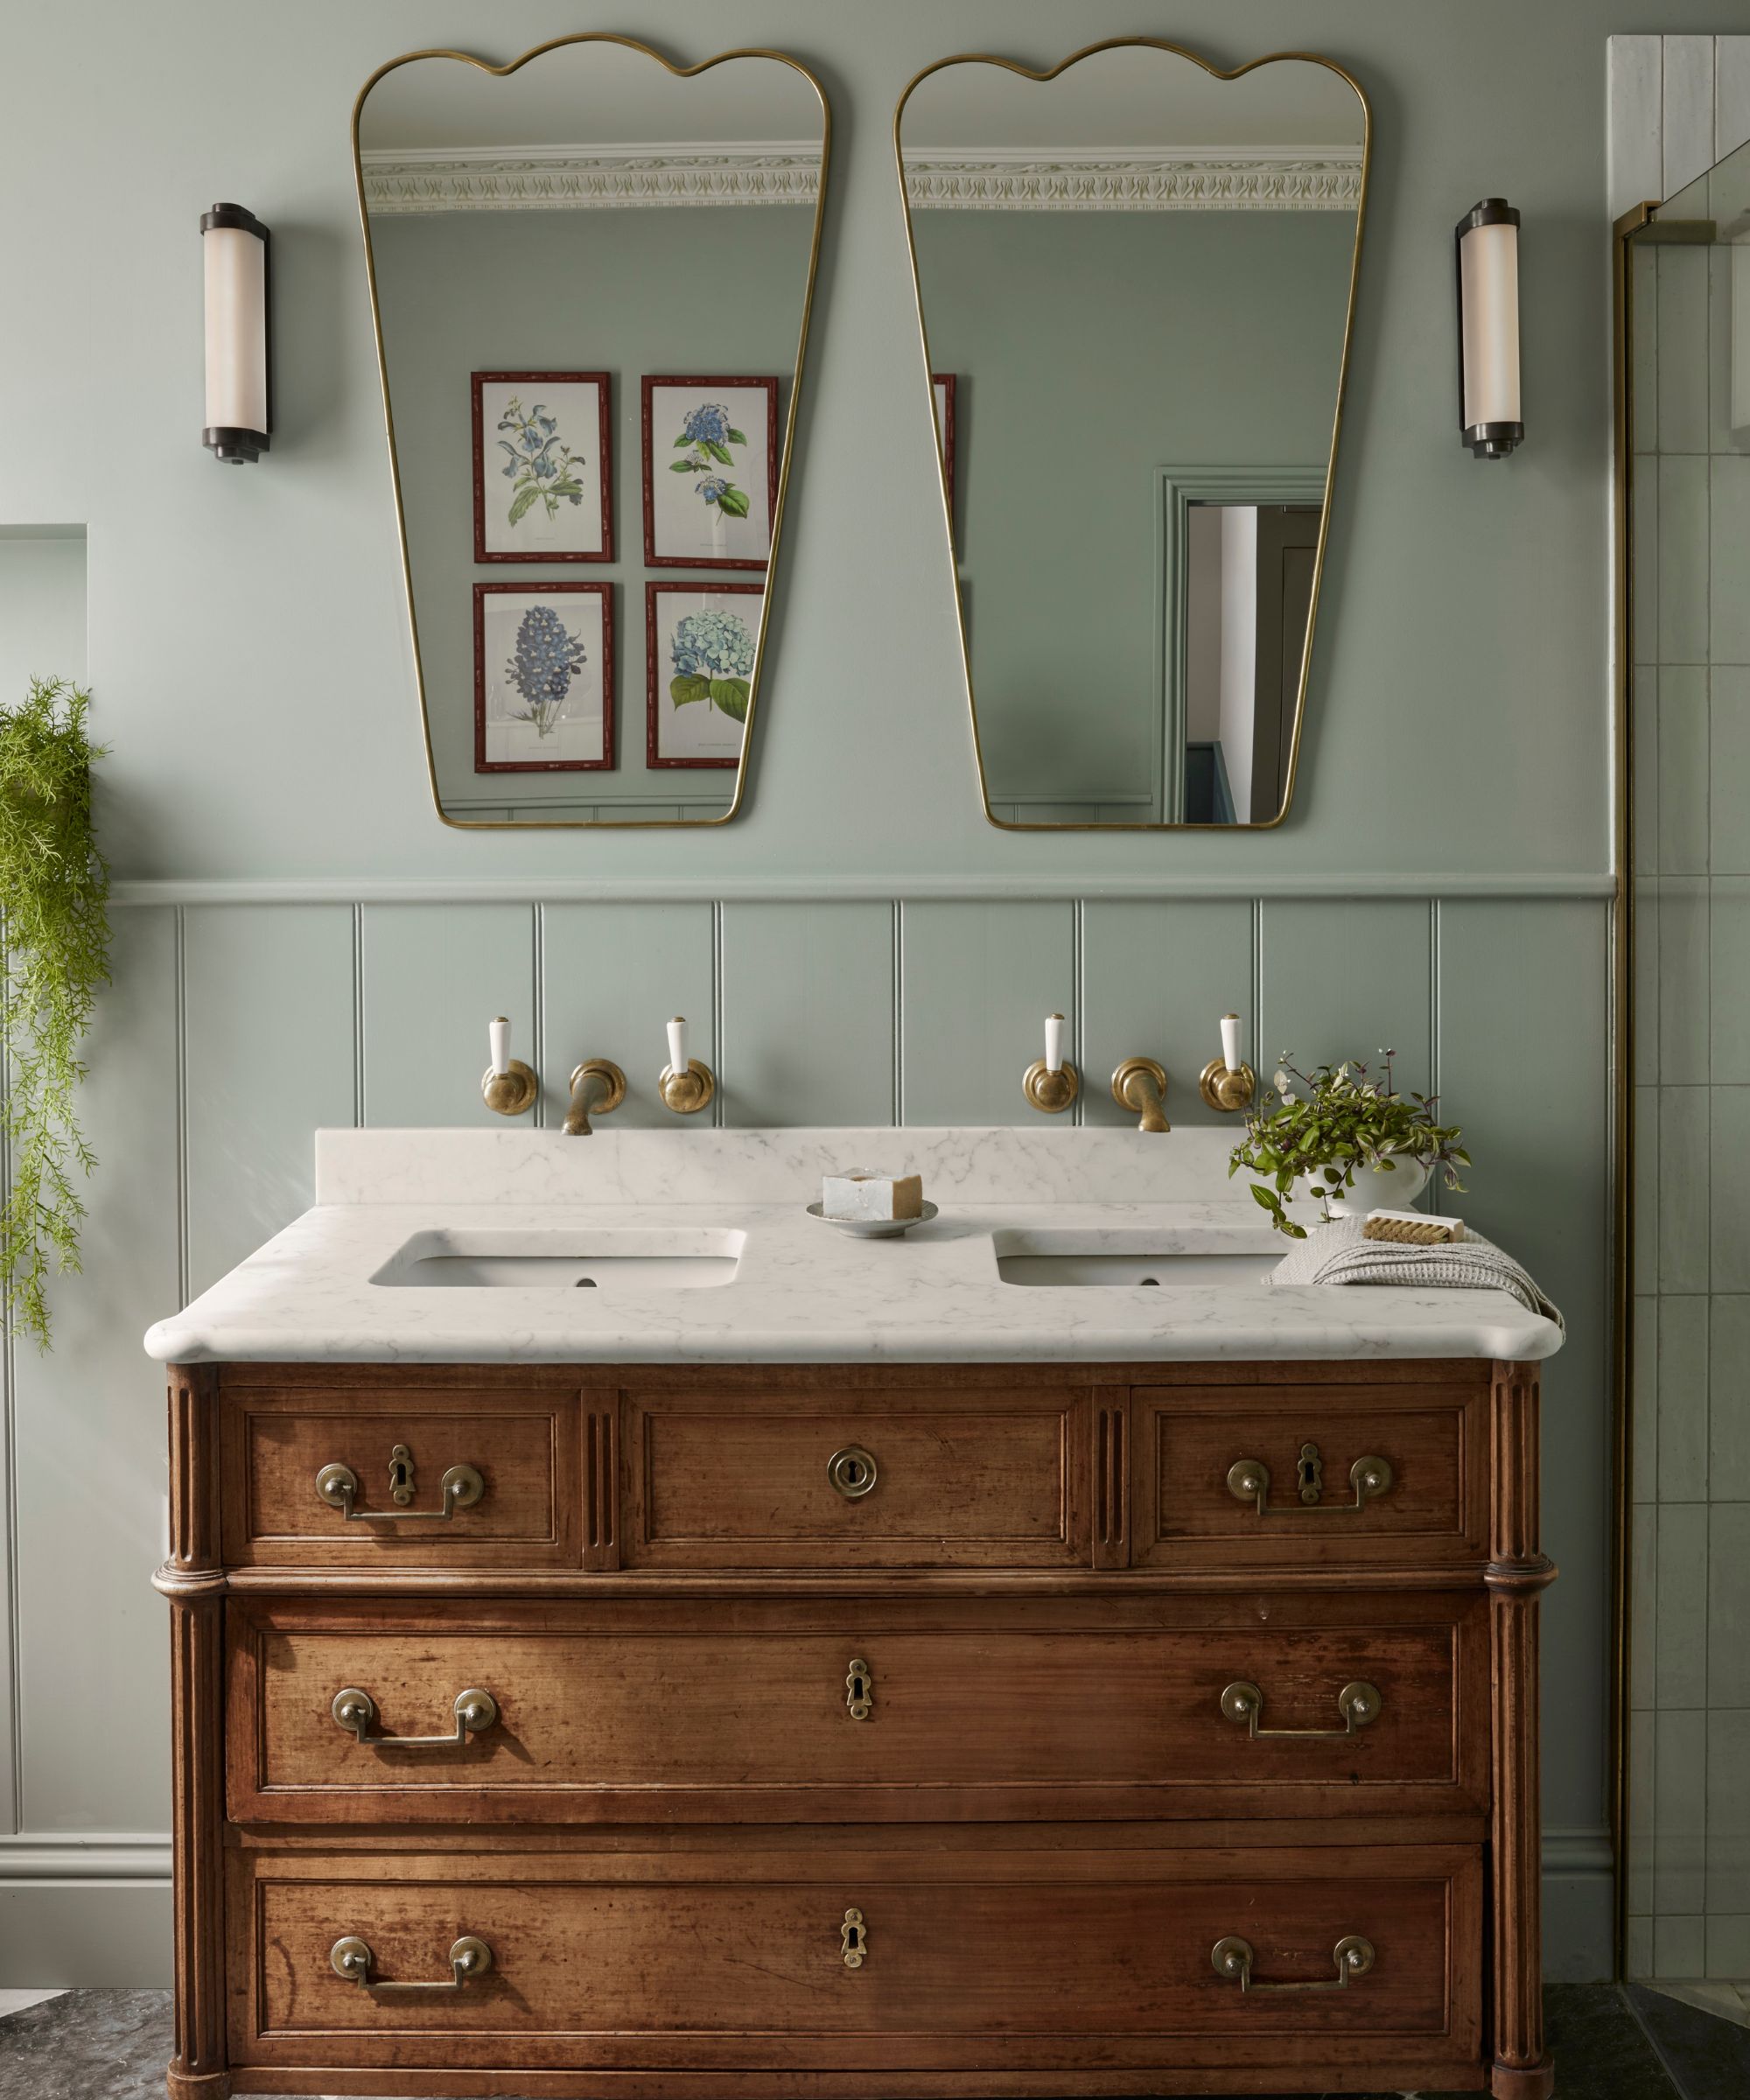 old meets new bathroom with antique double vanity and modern mirrors with panelled walls